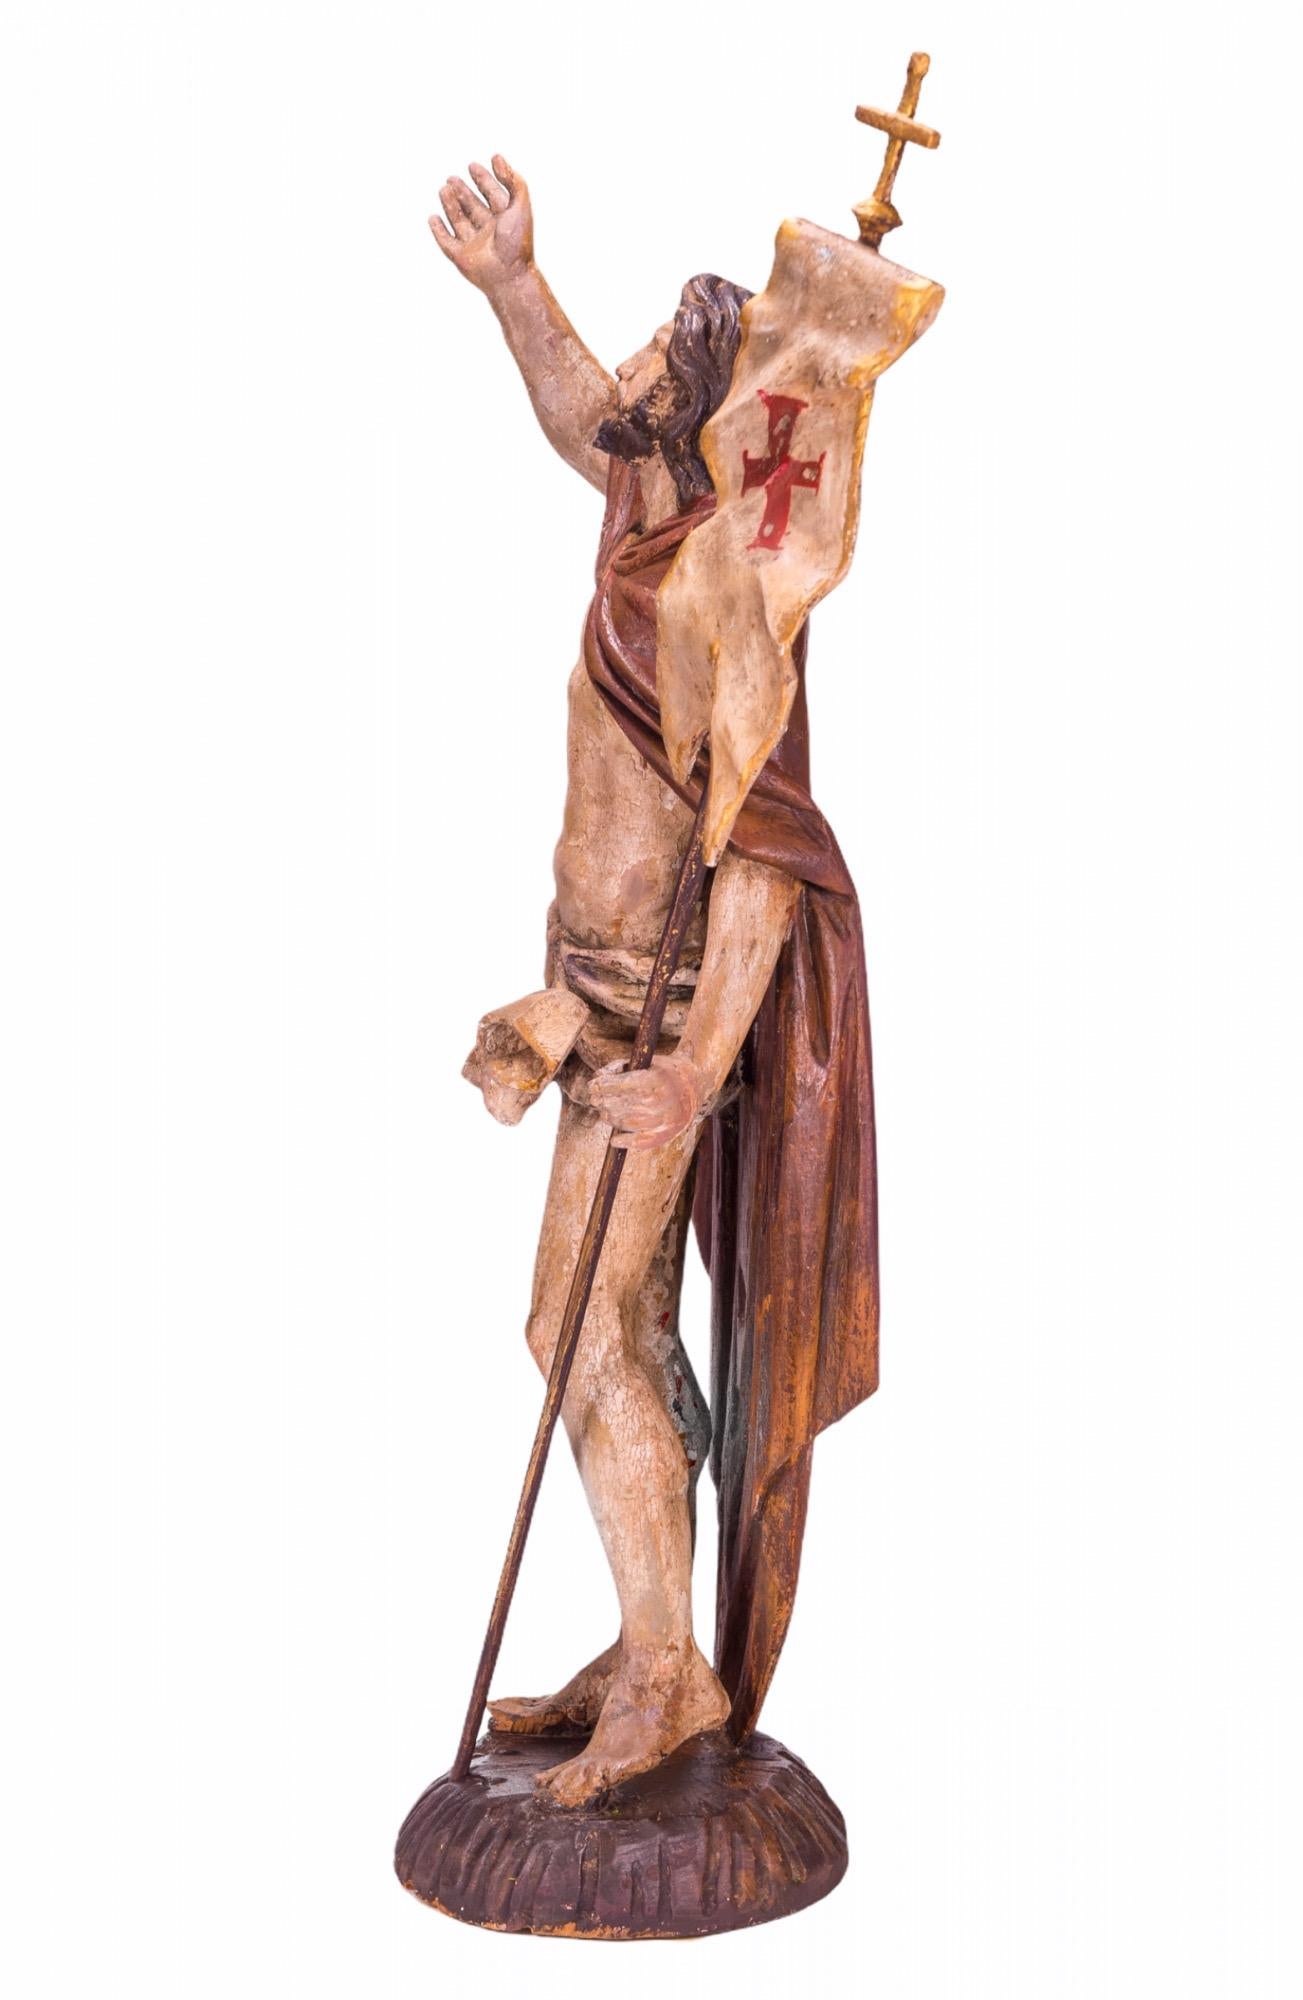 16th Century Italian carved-wood and polychromed sculpture of Jesus Christ the conqueror raising the flag after his resurrection.